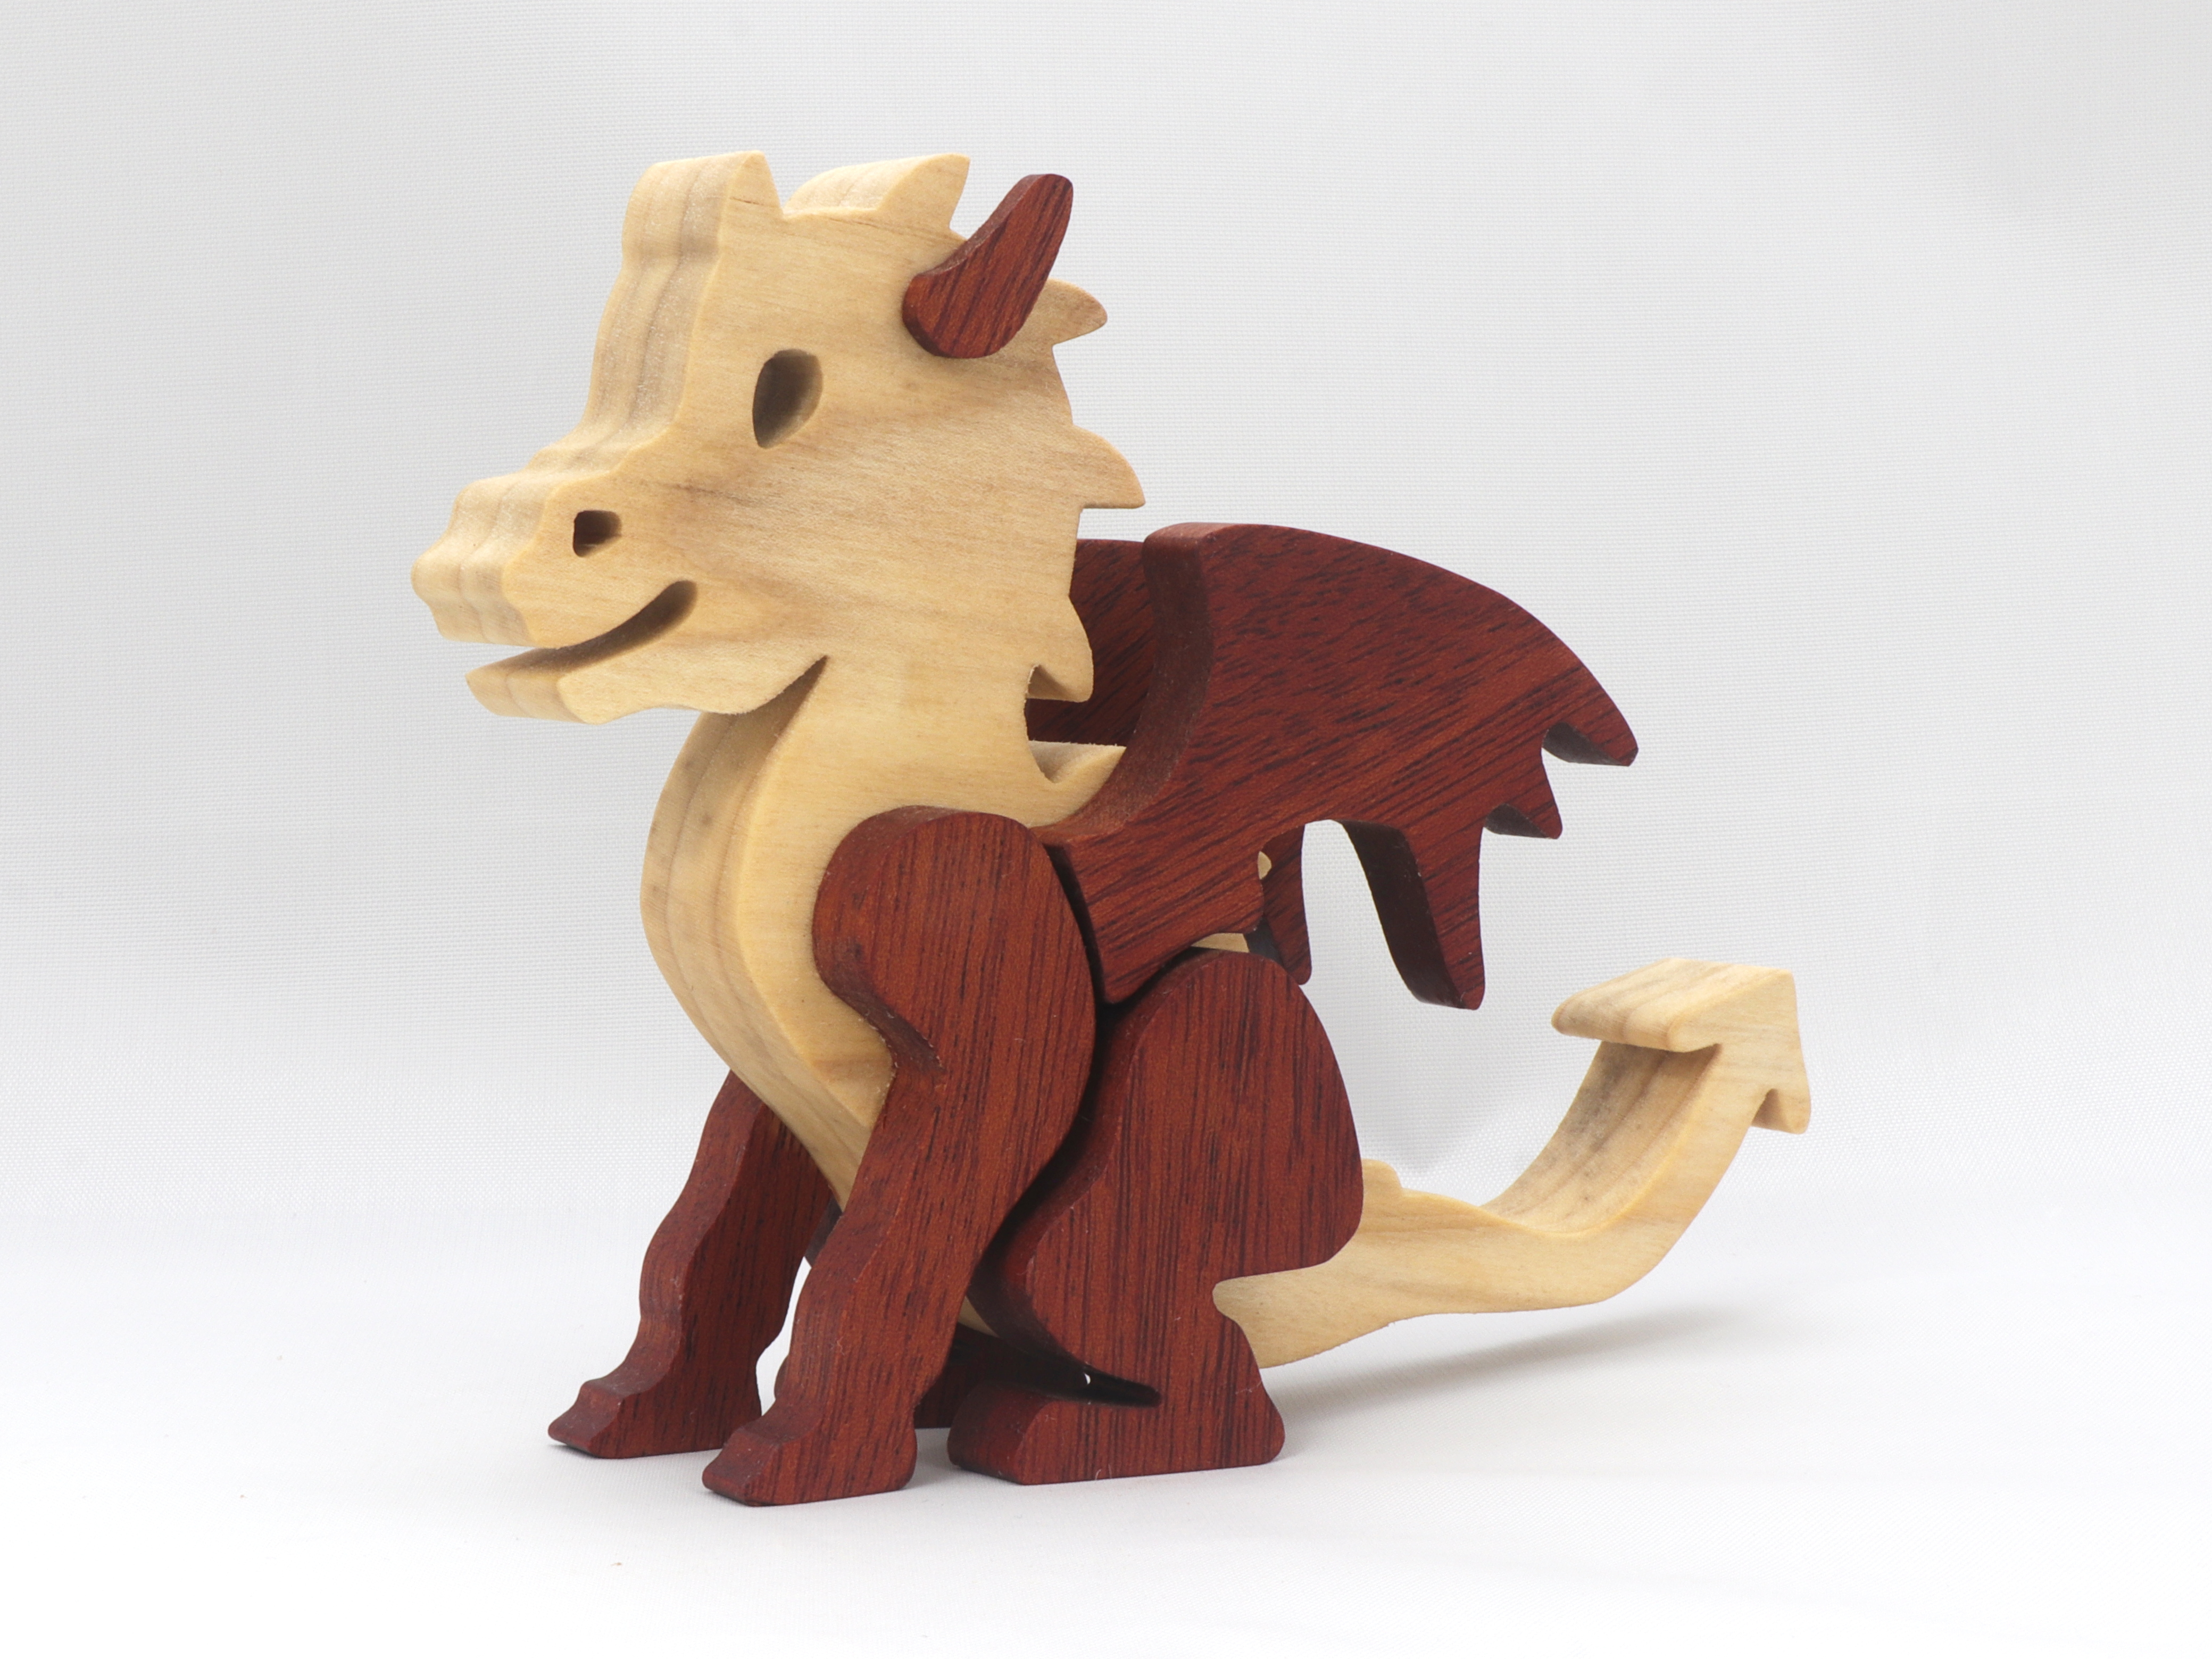 Baby wooden toy dragon.